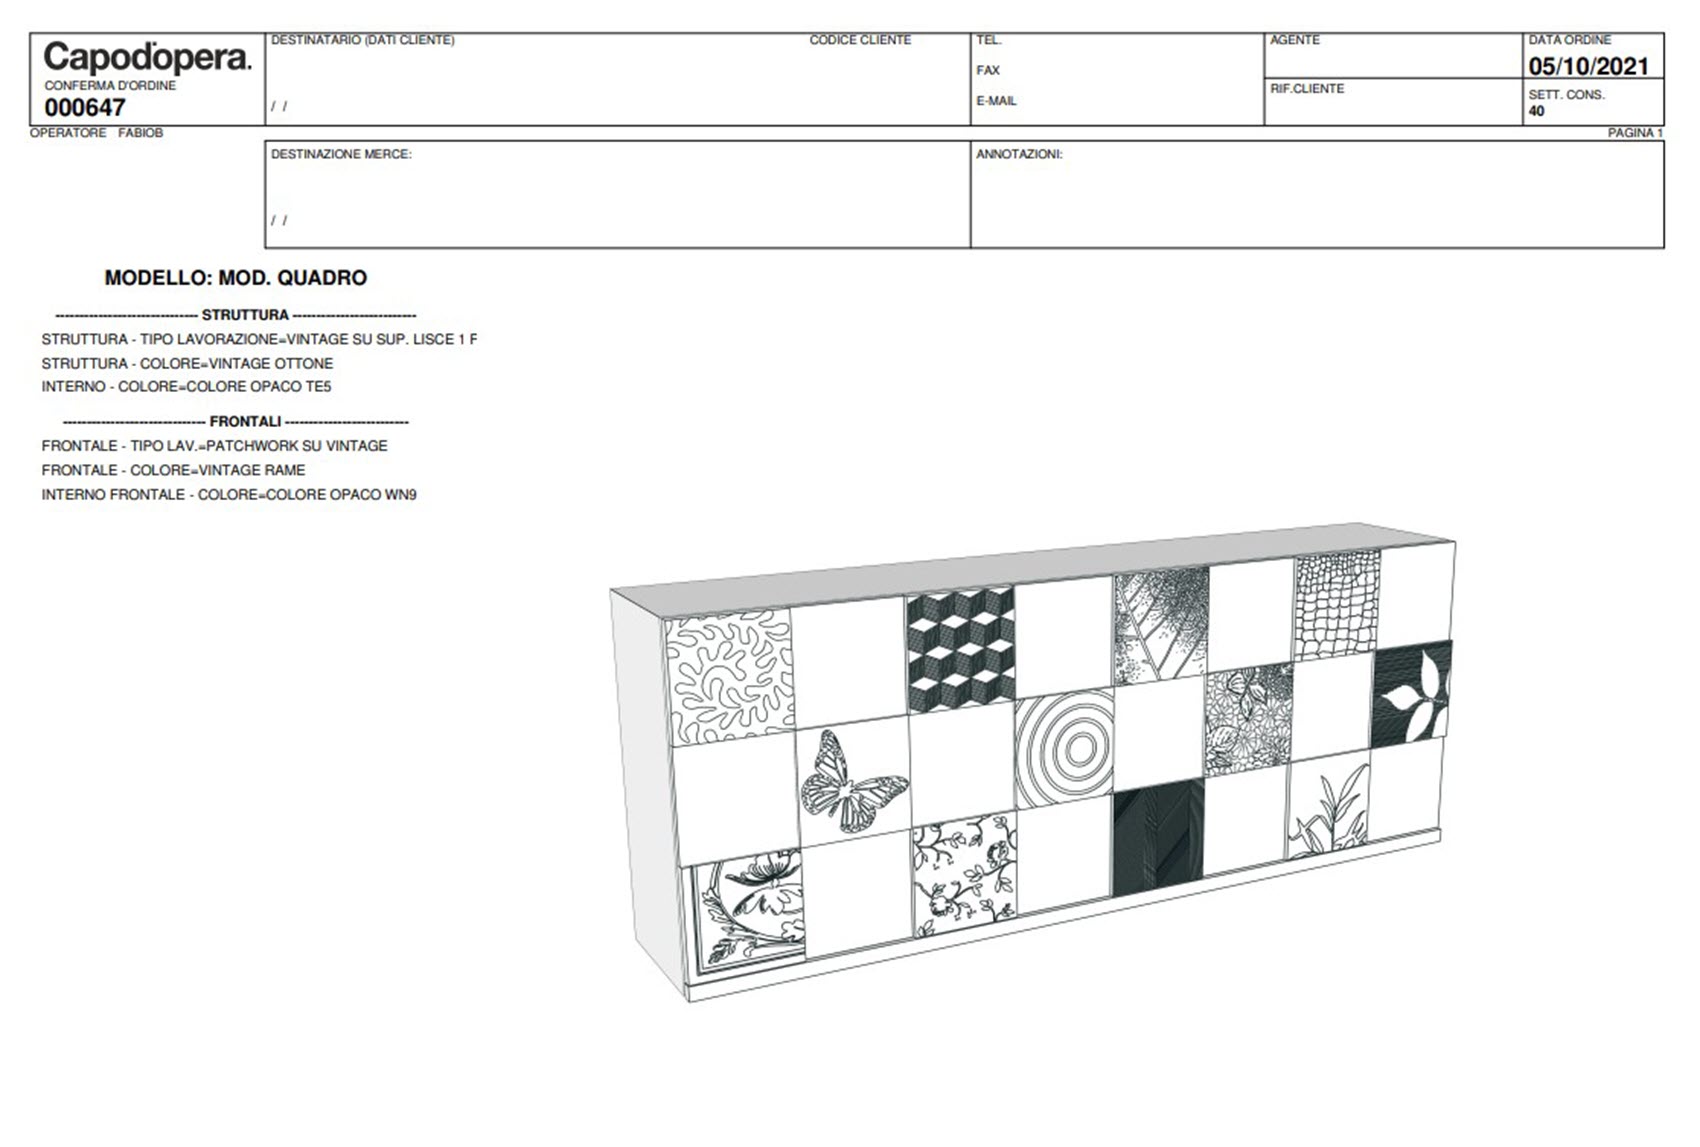 A technical drawing of a storage unit from Capo d'Opera, featuring detailed specifications and design elements in black and white.